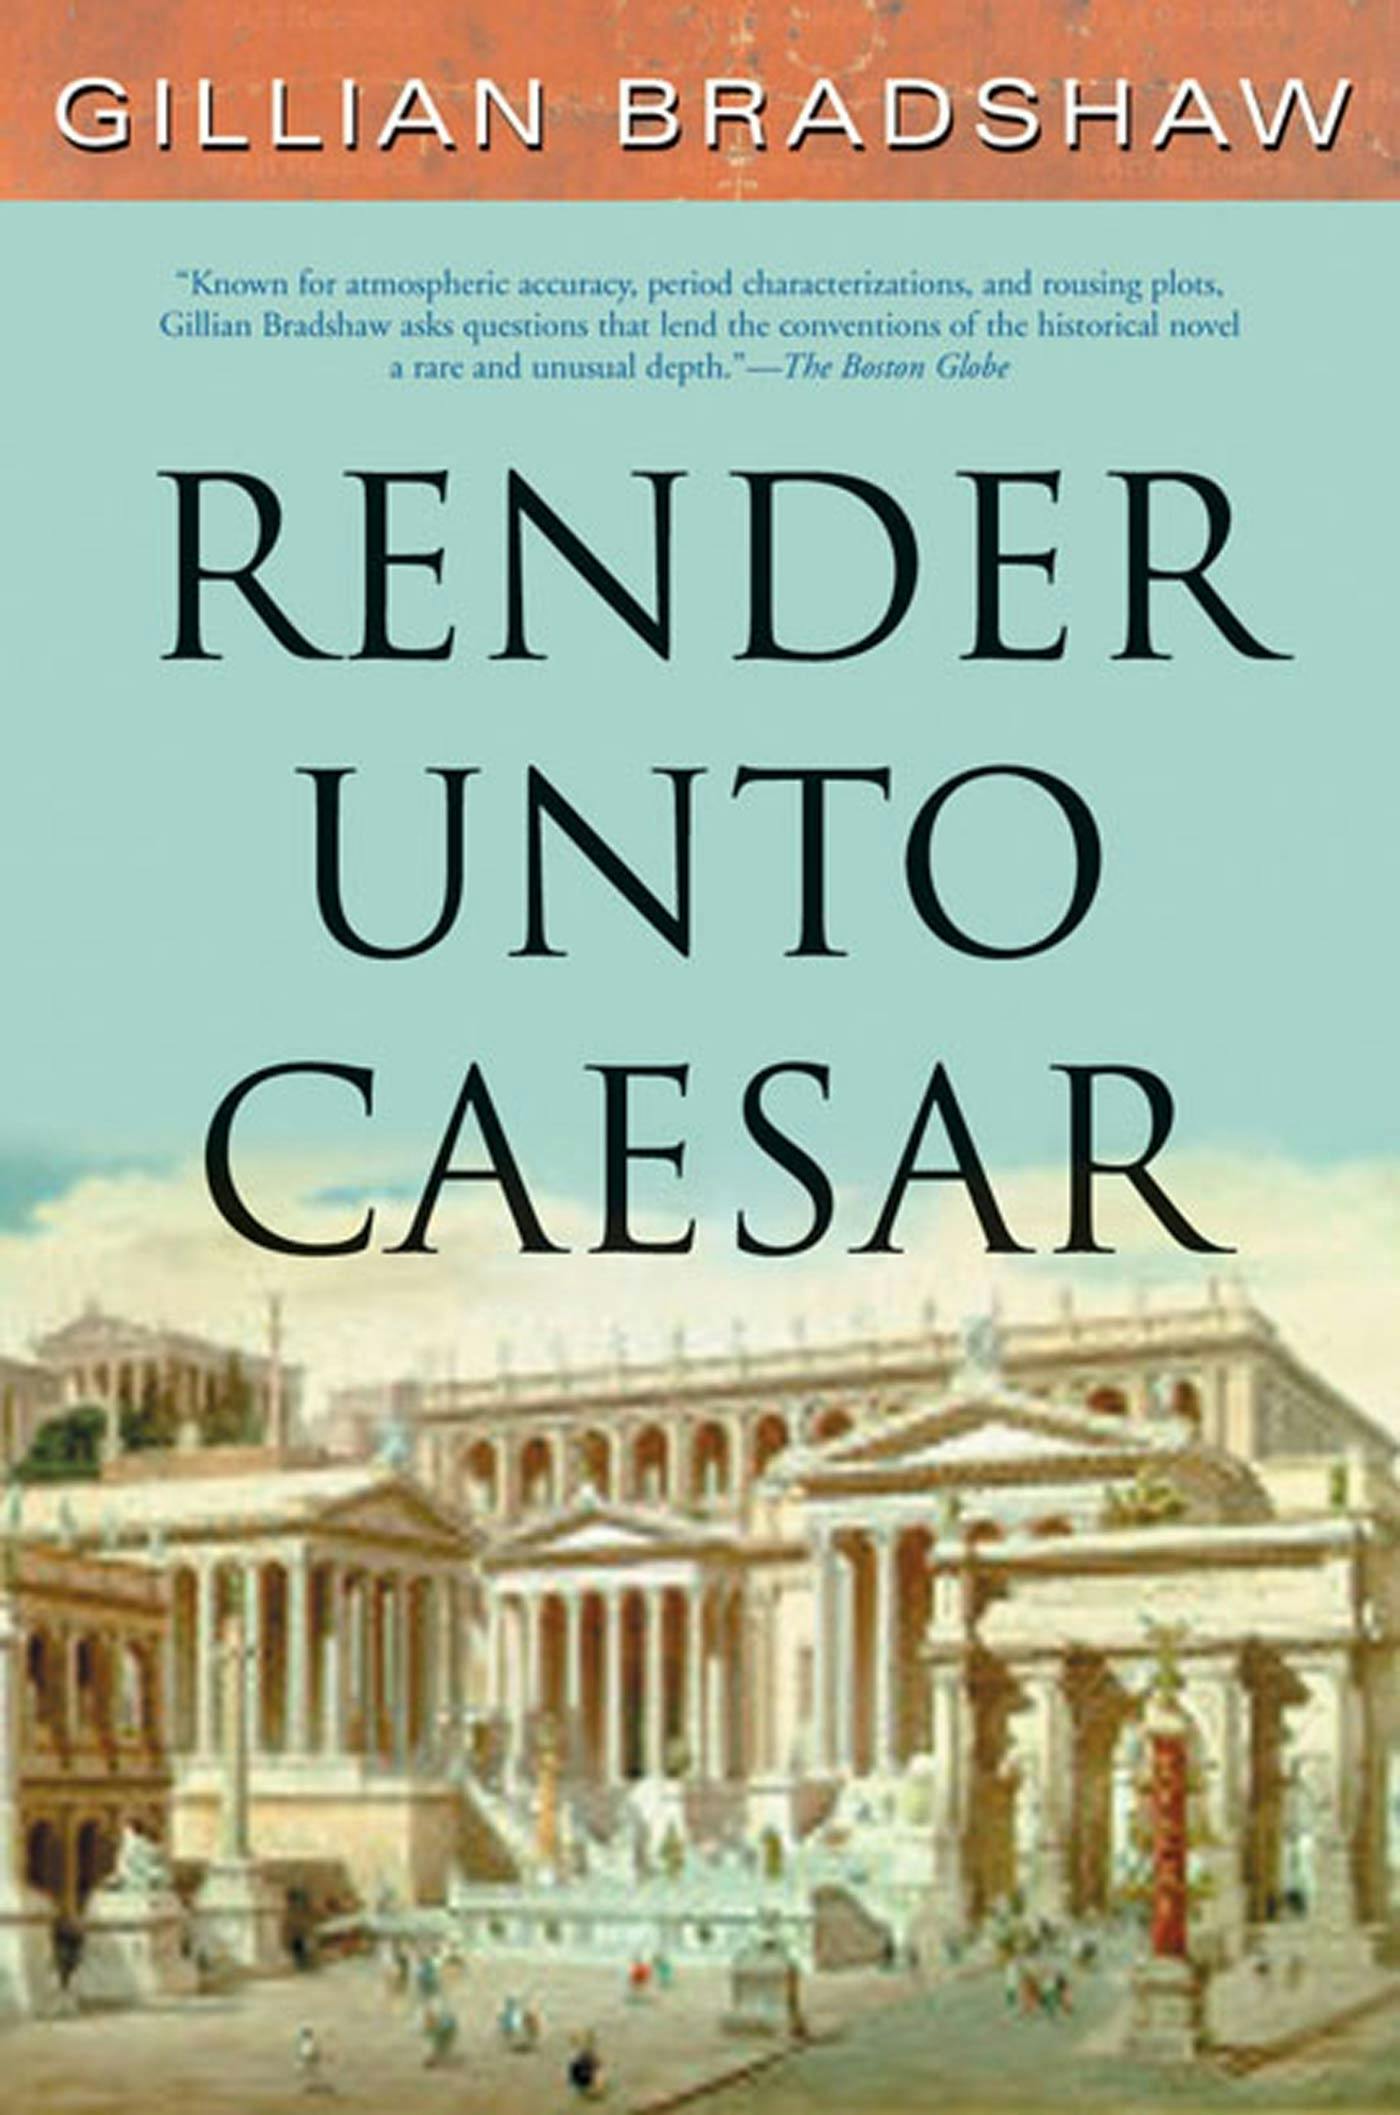 Cover for the book titled as: Render Unto Caesar